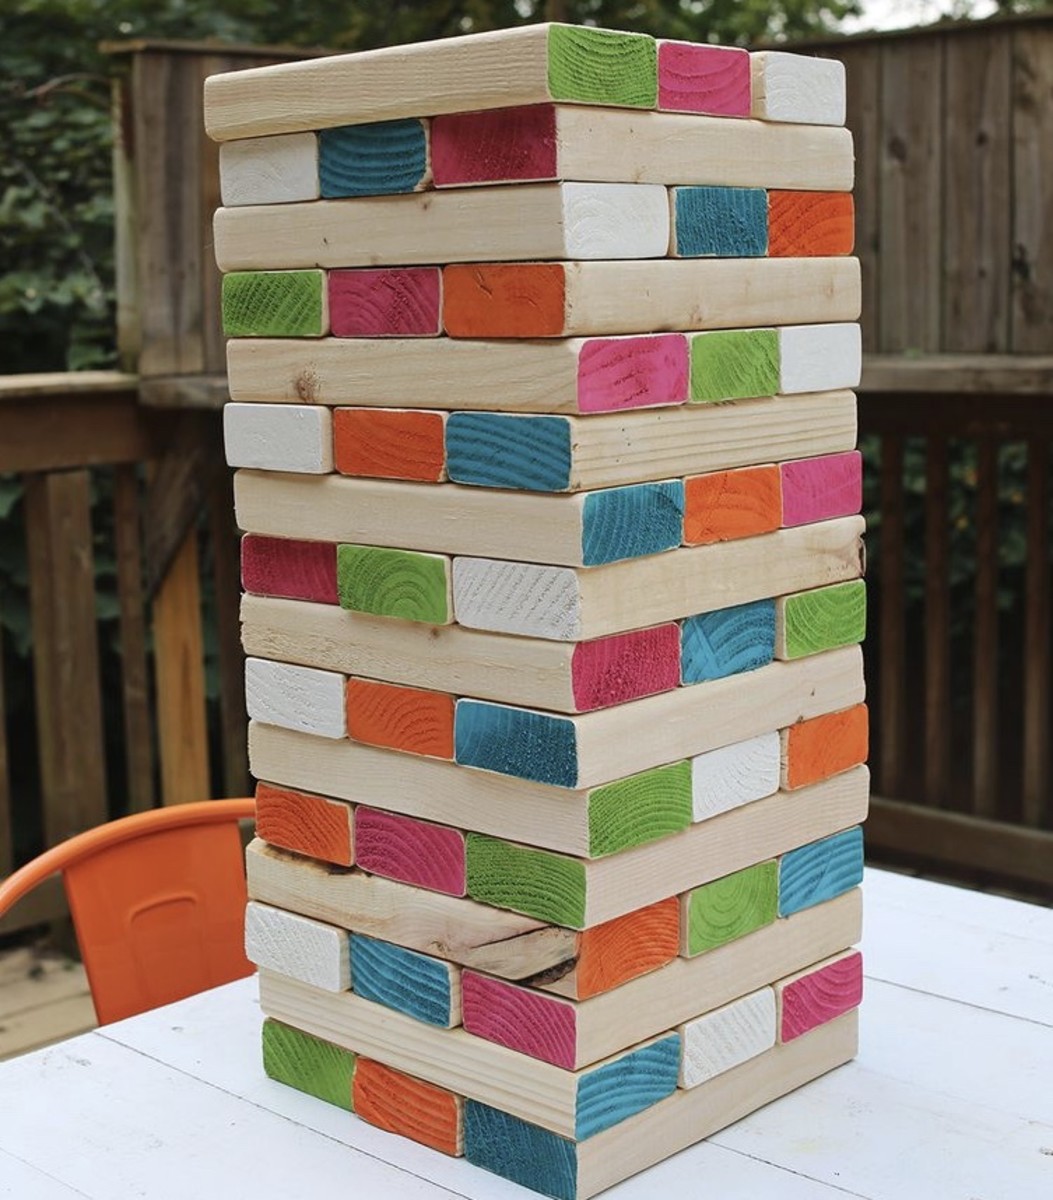 Colourful Jenga, made from 2x4 wood pieces.